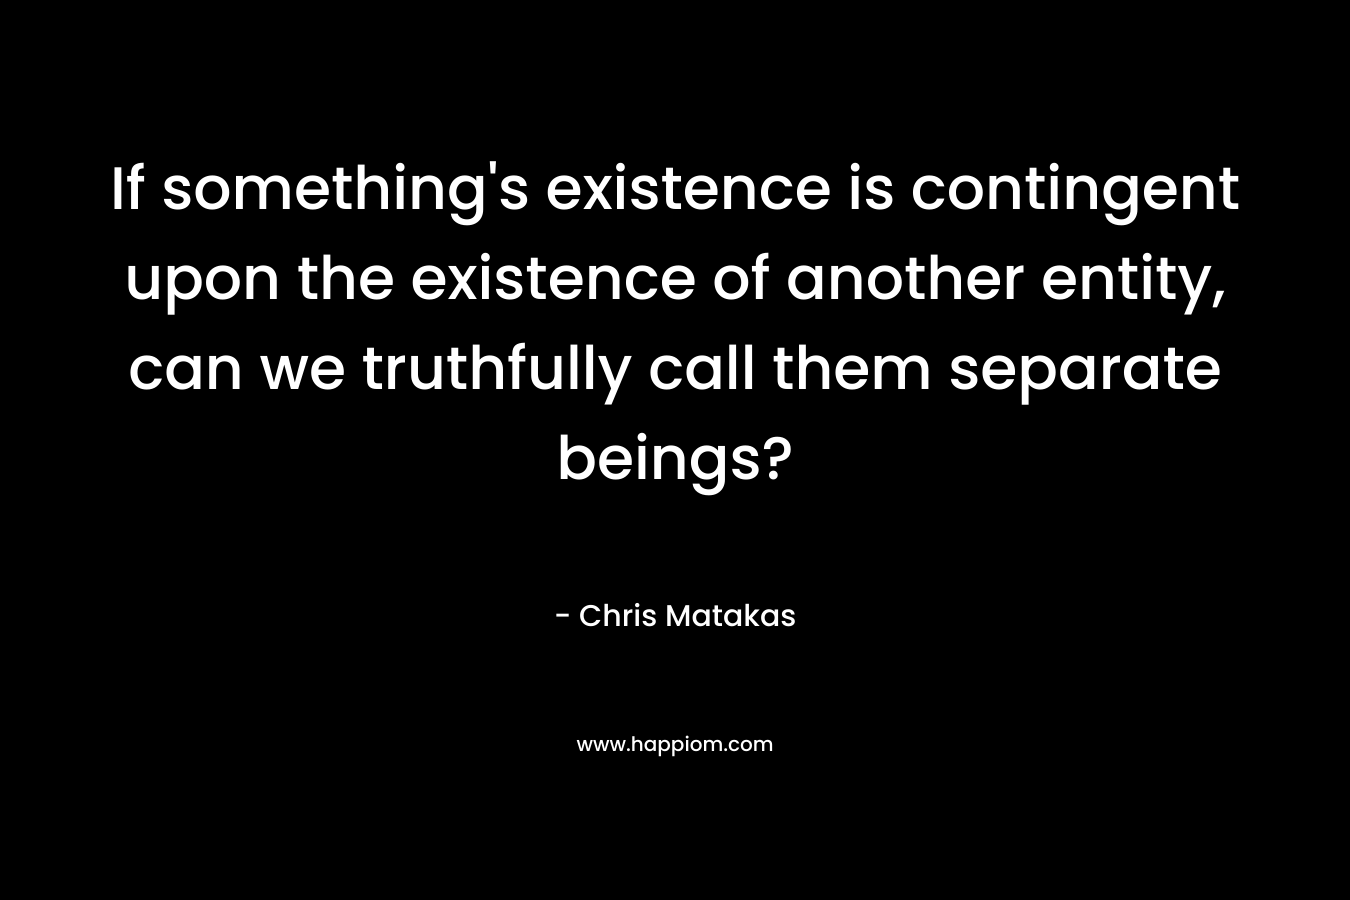 If something’s existence is contingent upon the existence of another entity, can we truthfully call them separate beings? – Chris Matakas